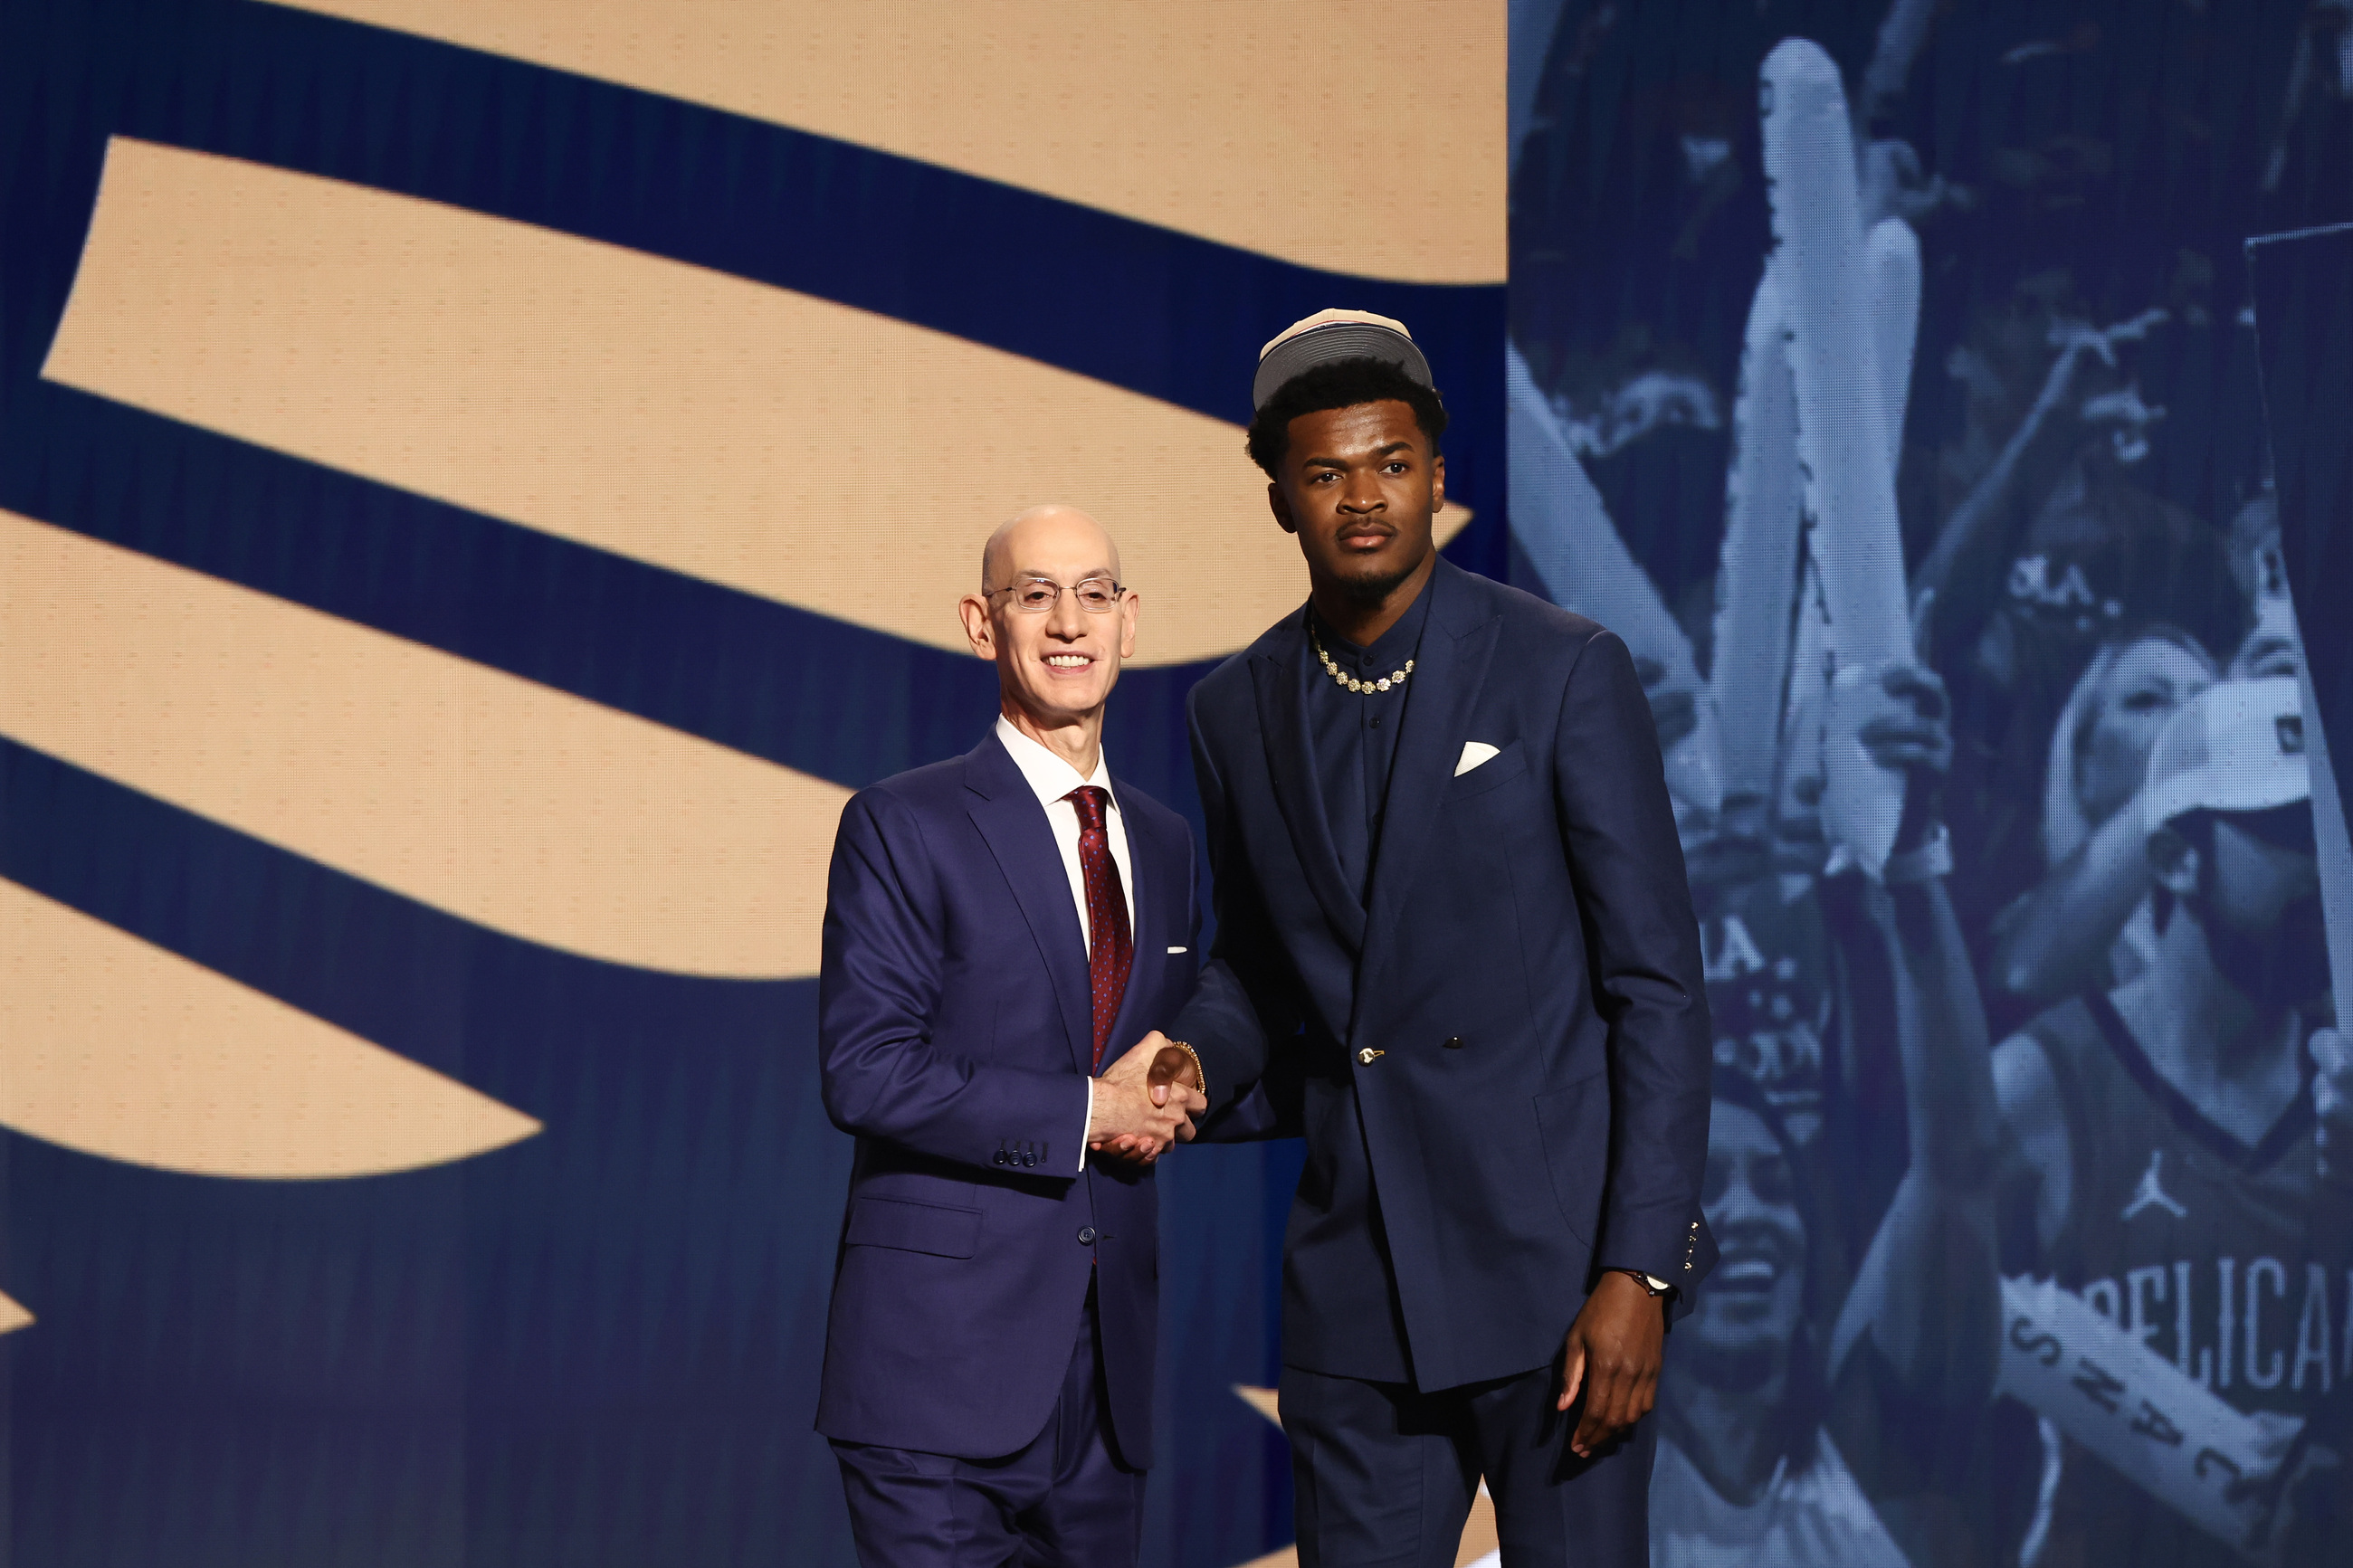 Yves Missi NBA draft outfit